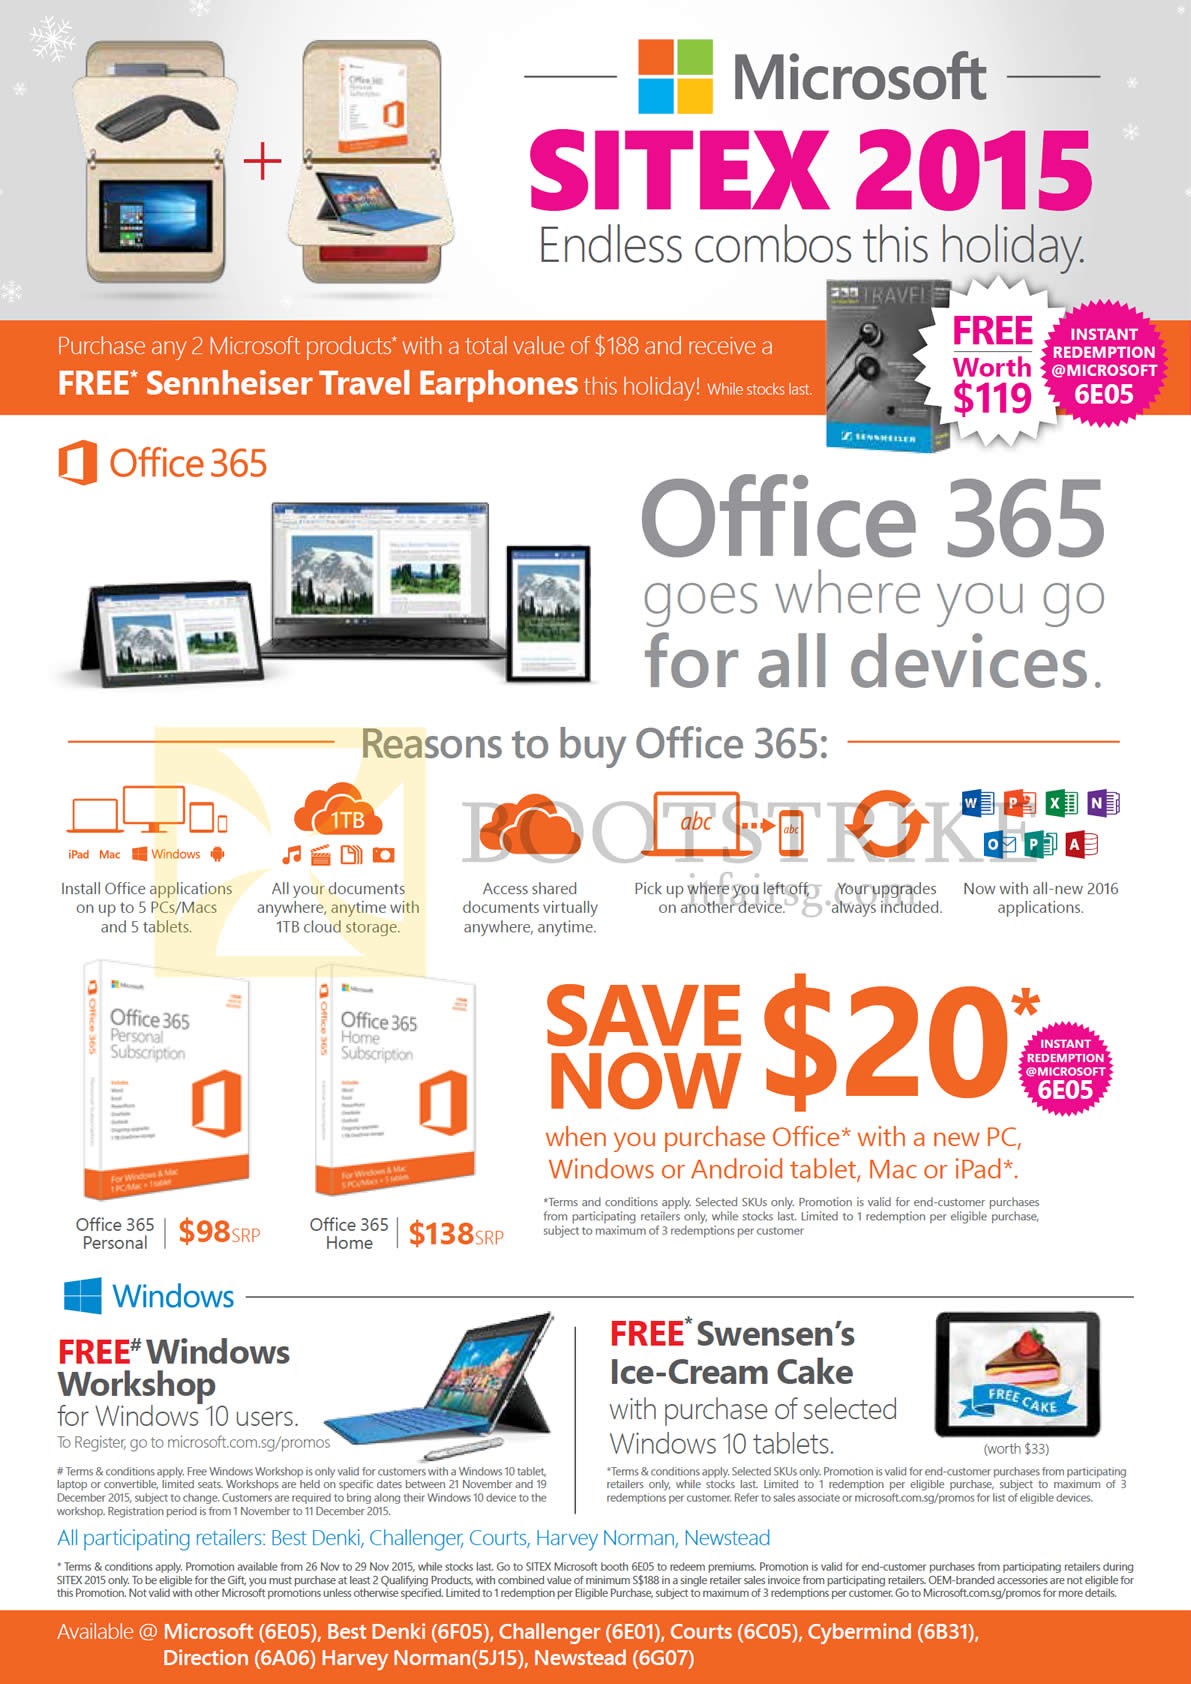 SITEX 2015 price list image brochure of Microsoft Office 365 Personal, Home, Windows 10